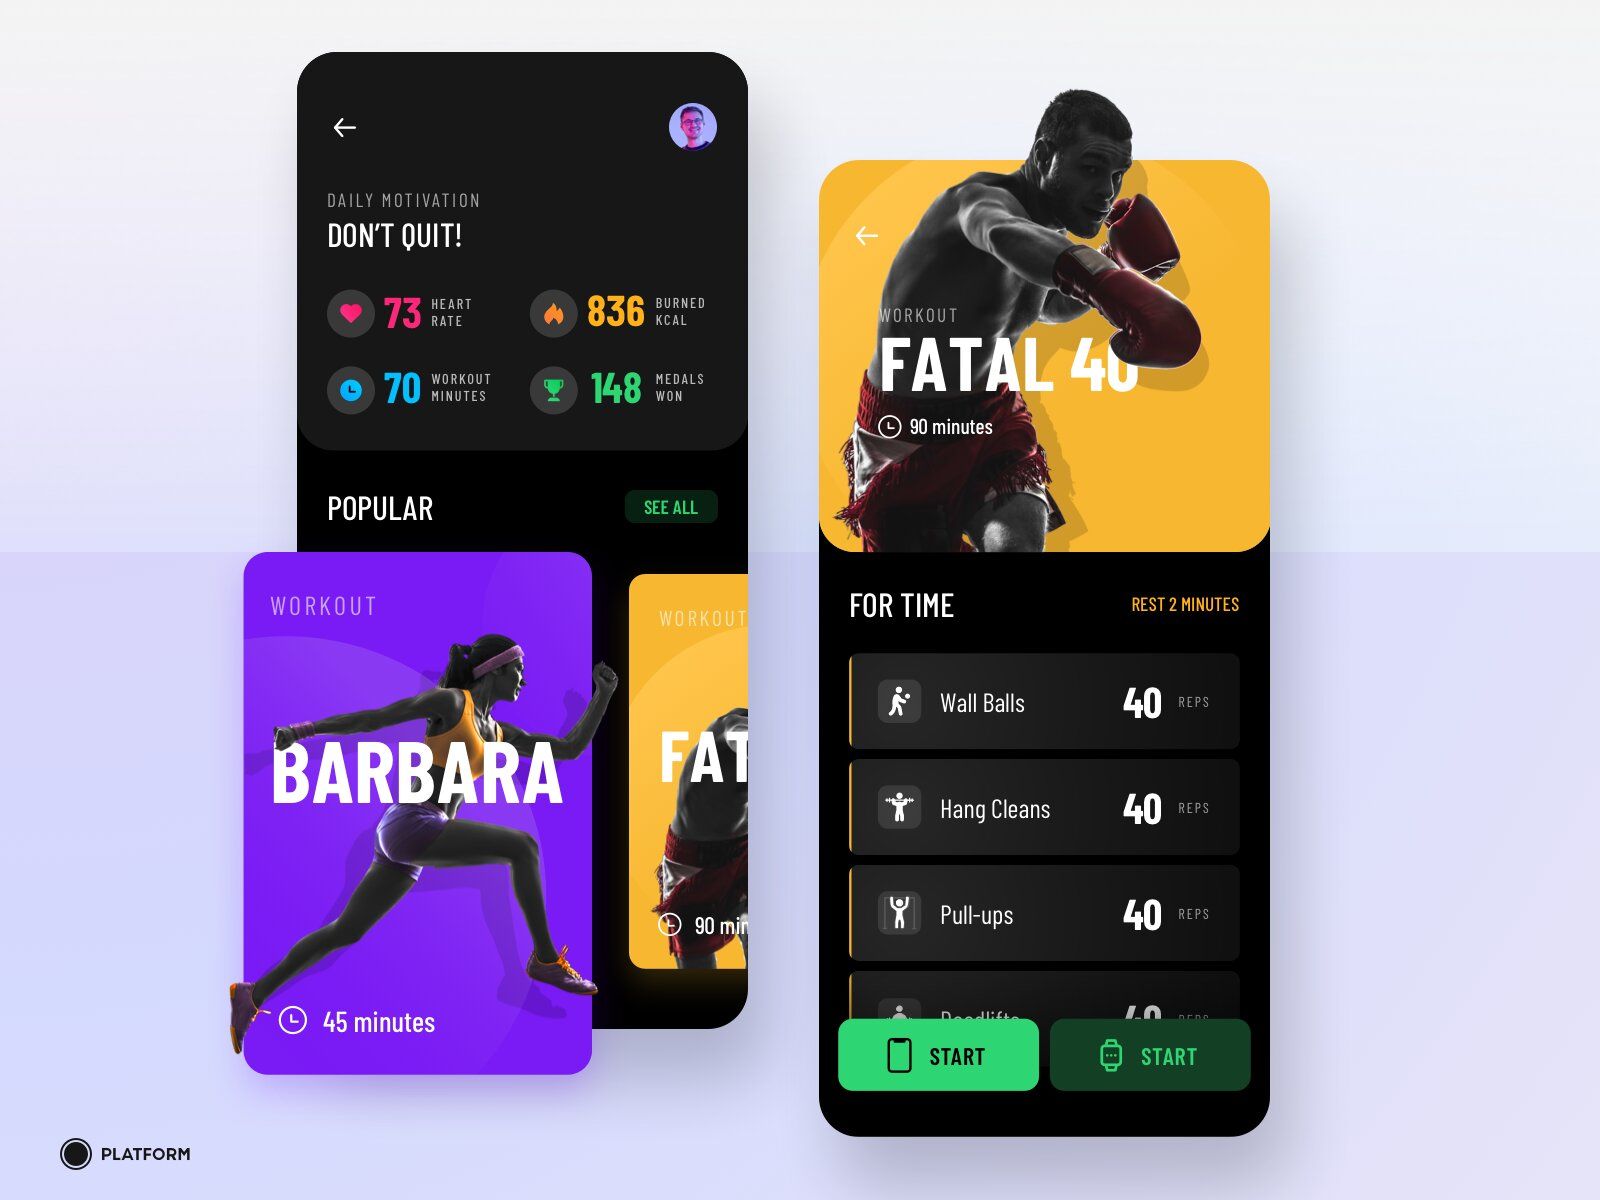 You can track different types of activities with Fitbit (*image by [Andrej Roman](https://dribbble.com/andrej-roman){ rel="nofollow" .default-md}*)